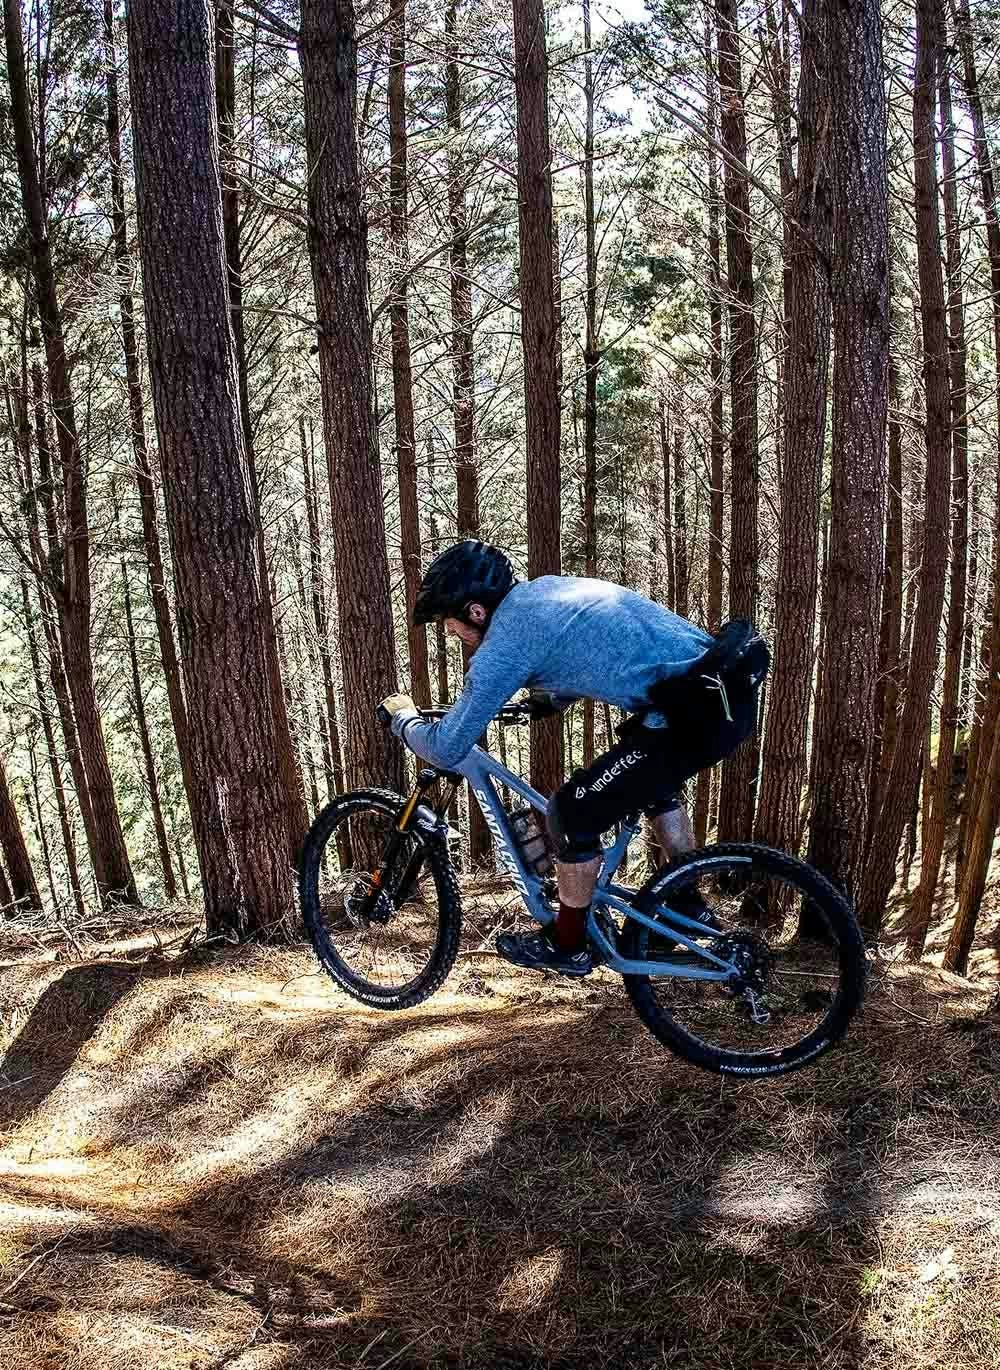 Jamie Nicoll riding his mountain bike in the forest